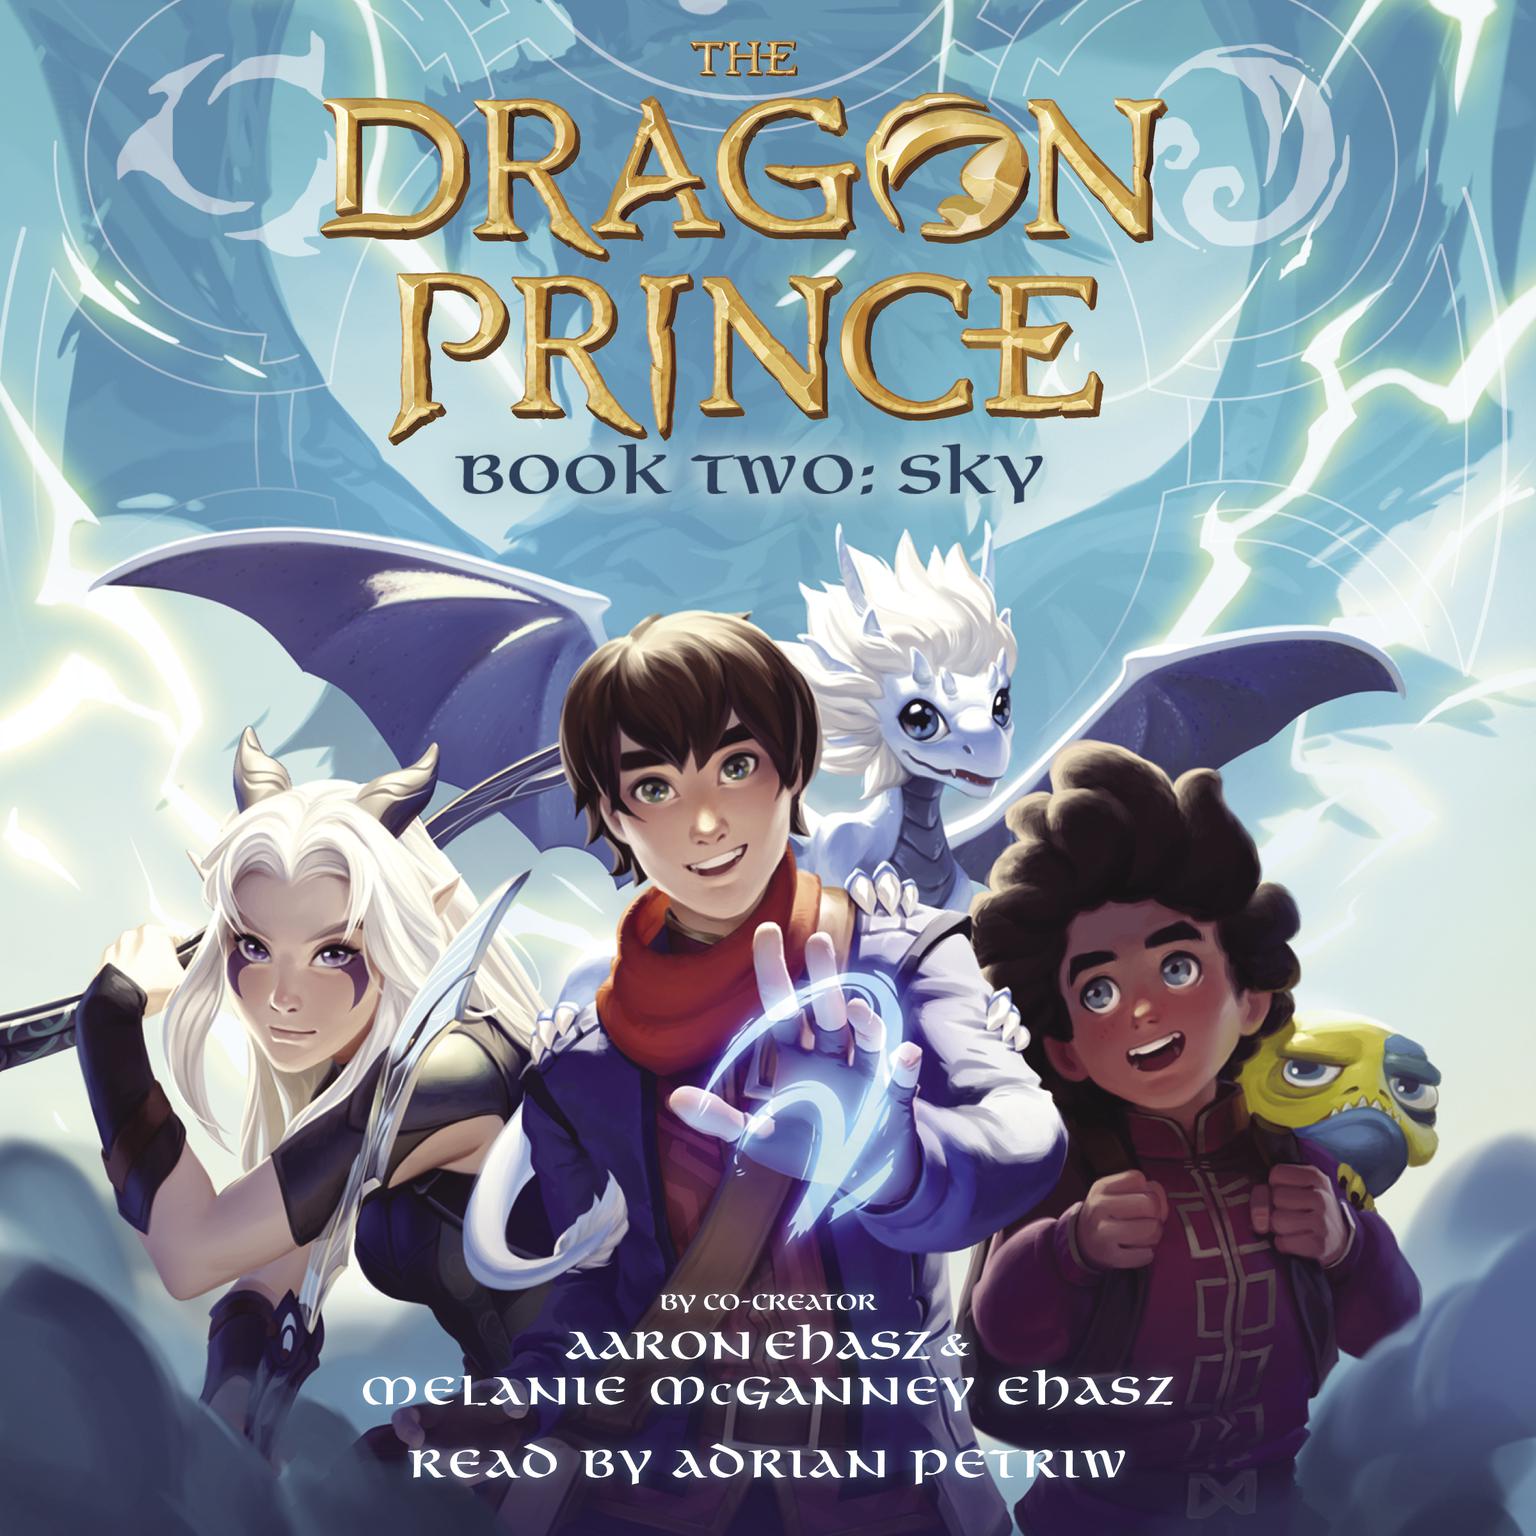 Book Two: Sky (The Dragon Prince #2) Audiobook, by Aaron Ehasz